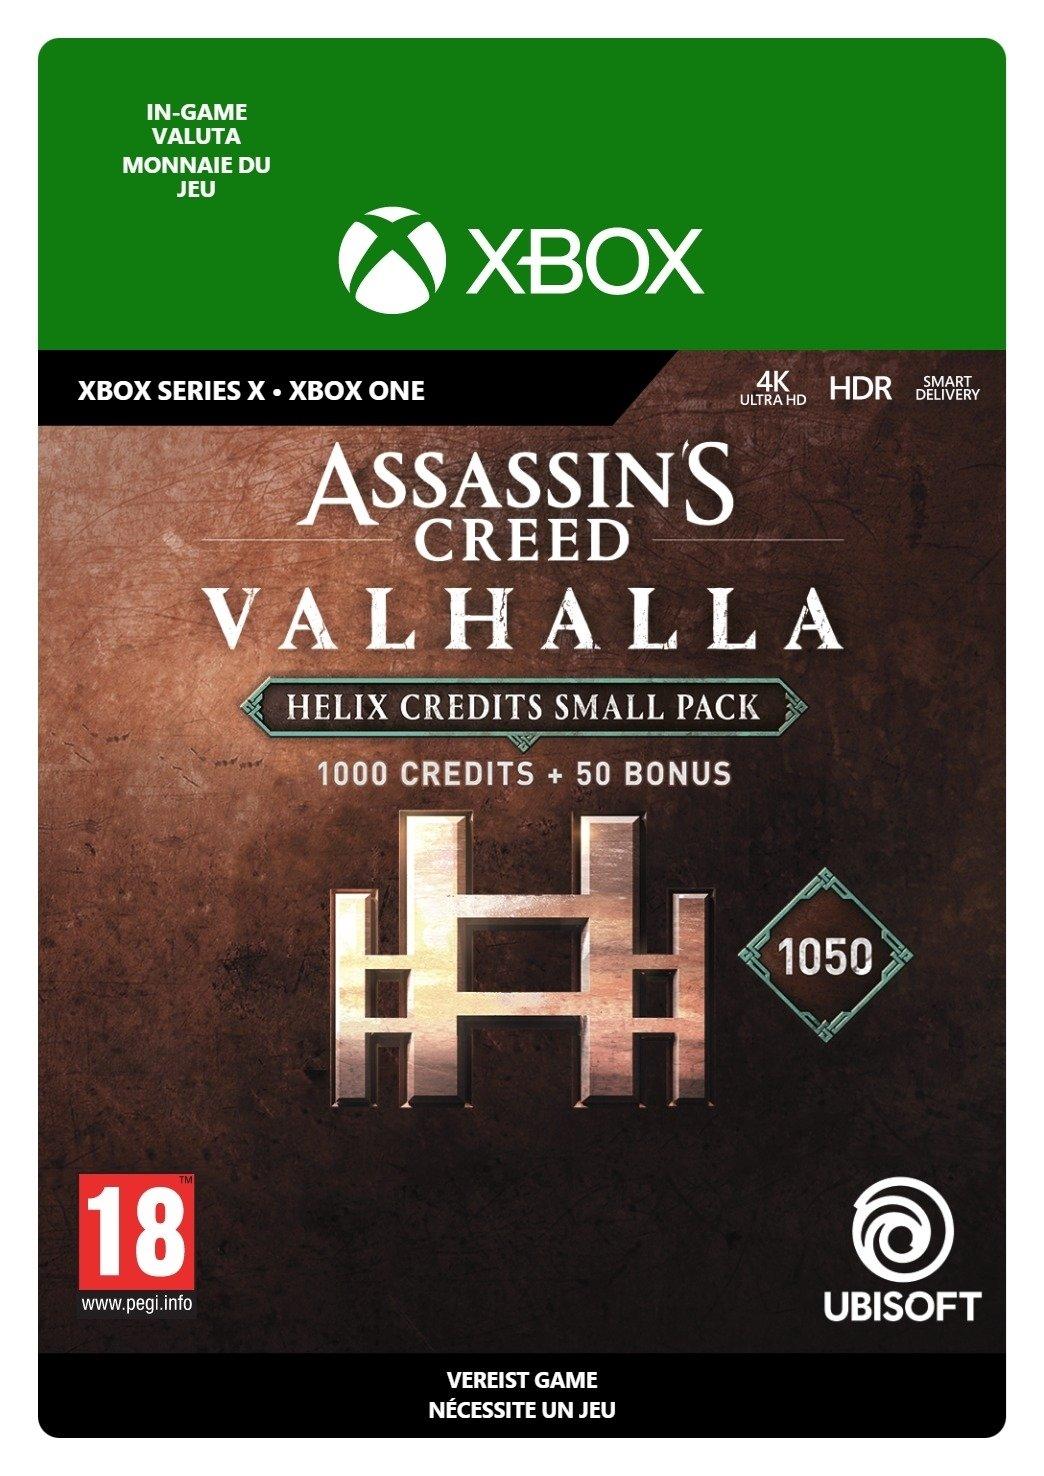 Assassin's Creed Valhalla Small Helix Credits Pack - Xbox Series X/Xbox One - Currency | 7F6-00268 (7458541f-a738-4b4a-8943-9b4ff941b2e0)